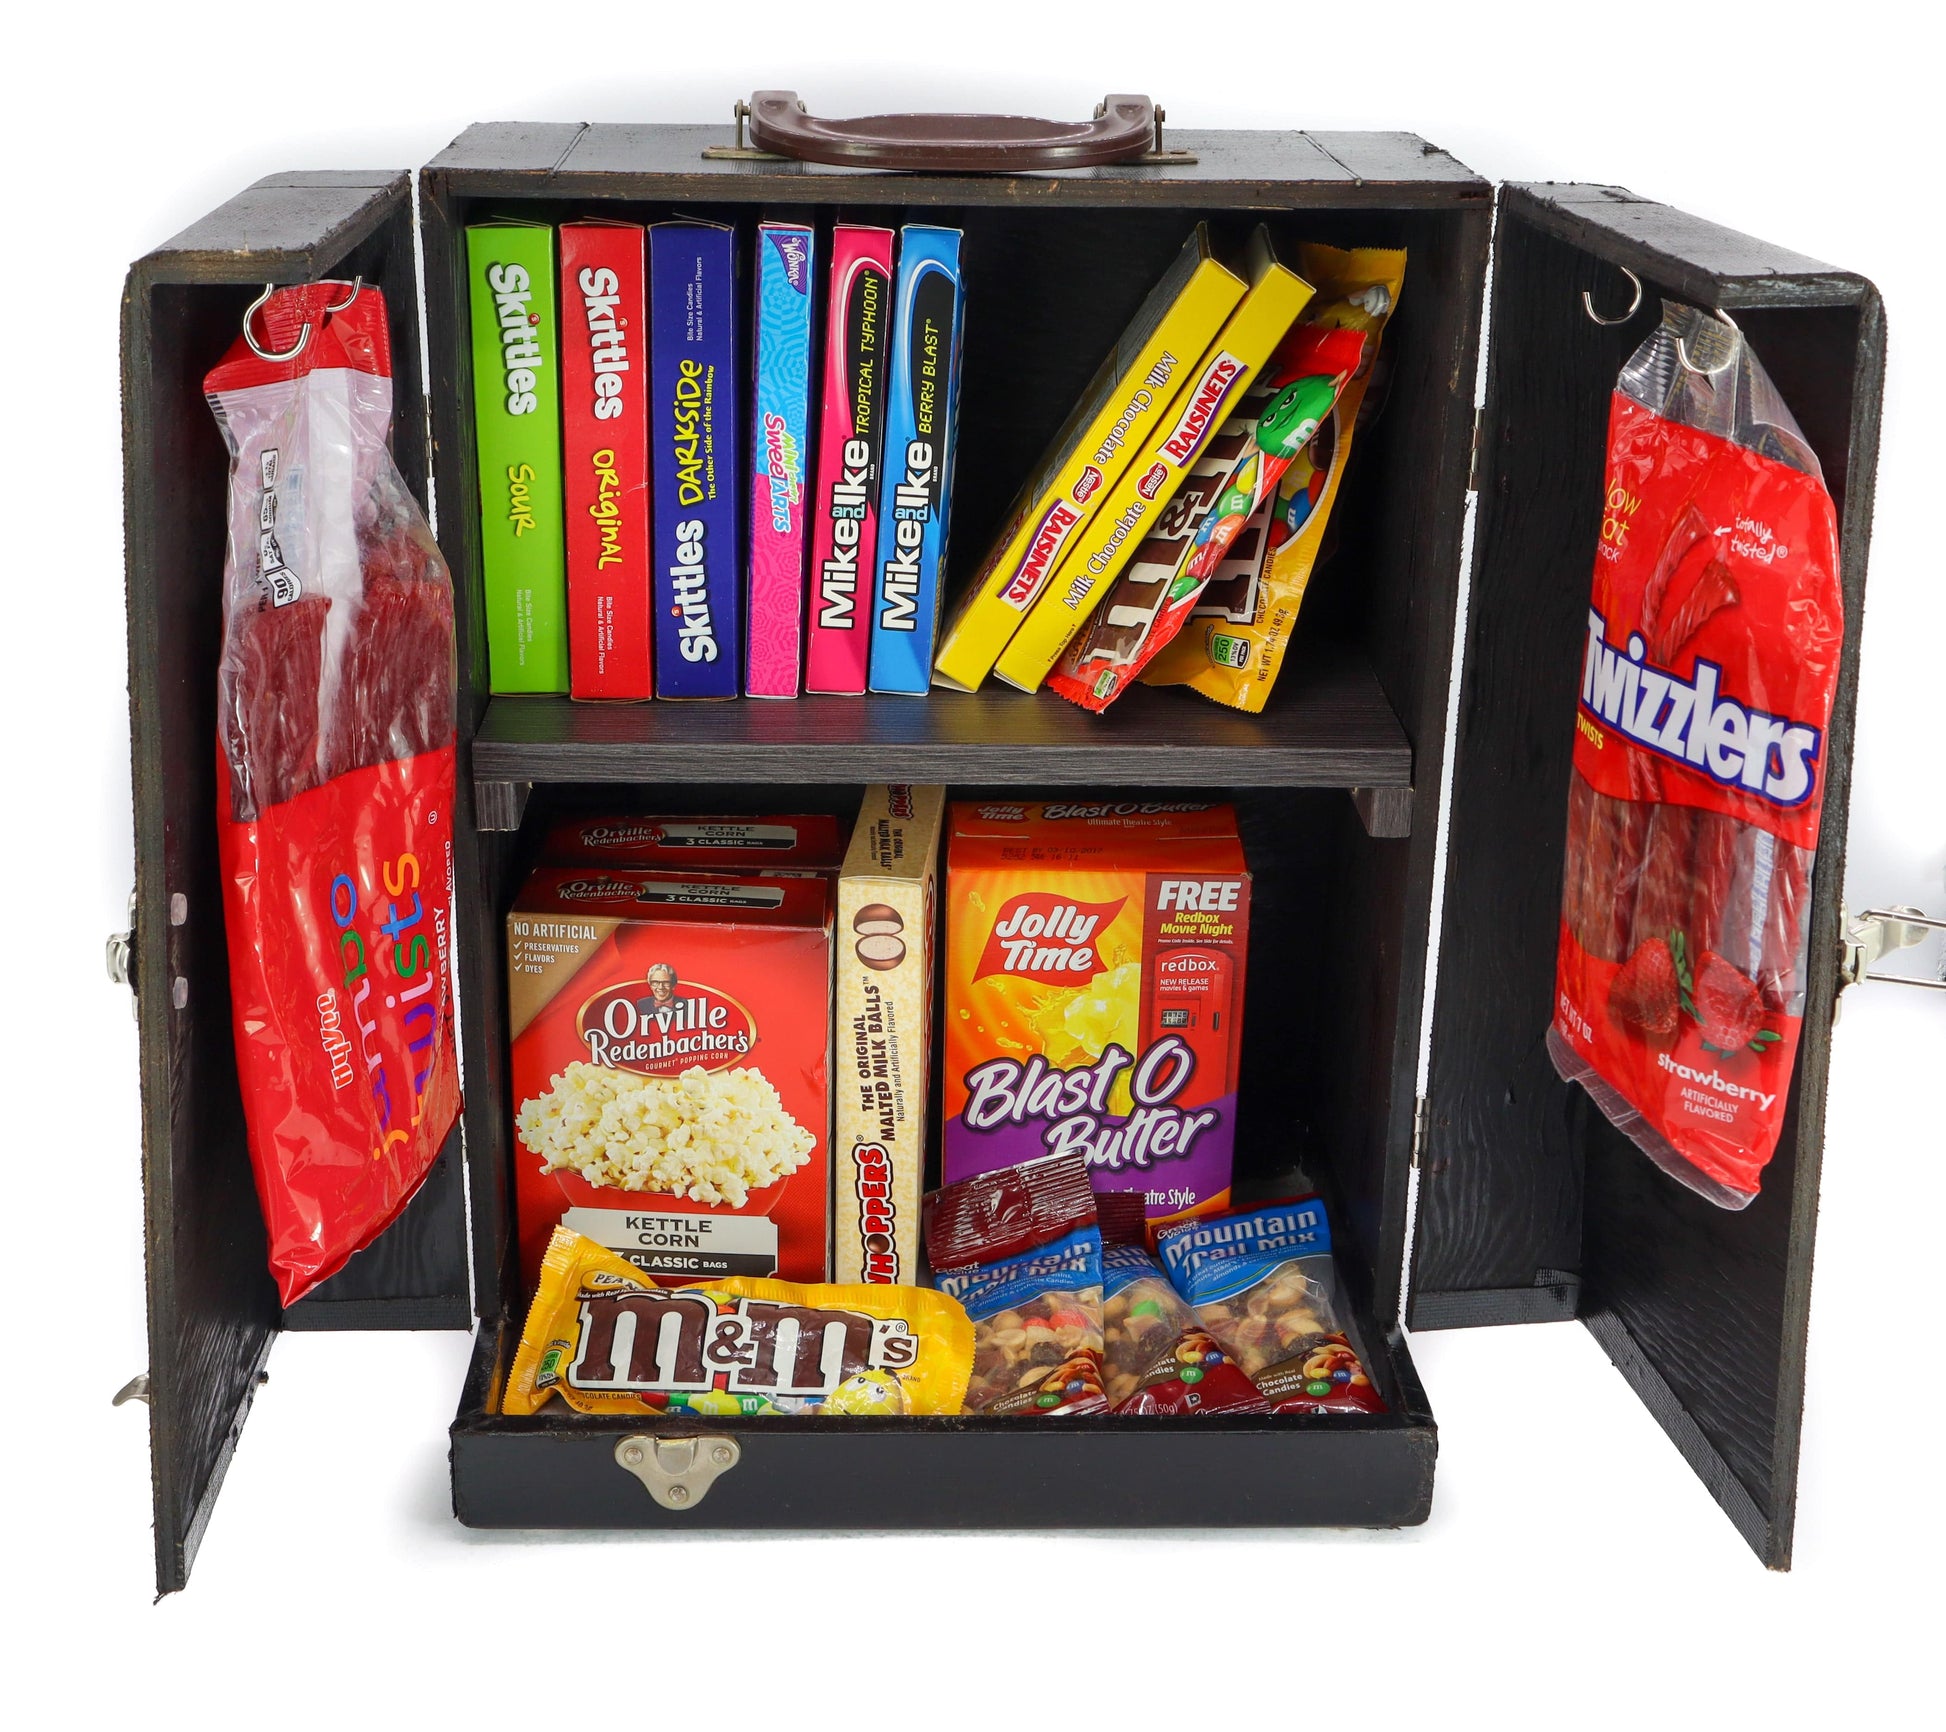 LightAndTimeArt Food Storage Containers Black Vintage Popcorn and Candy Storage Cabinet, 1950 Keystone 8mm Projector Case